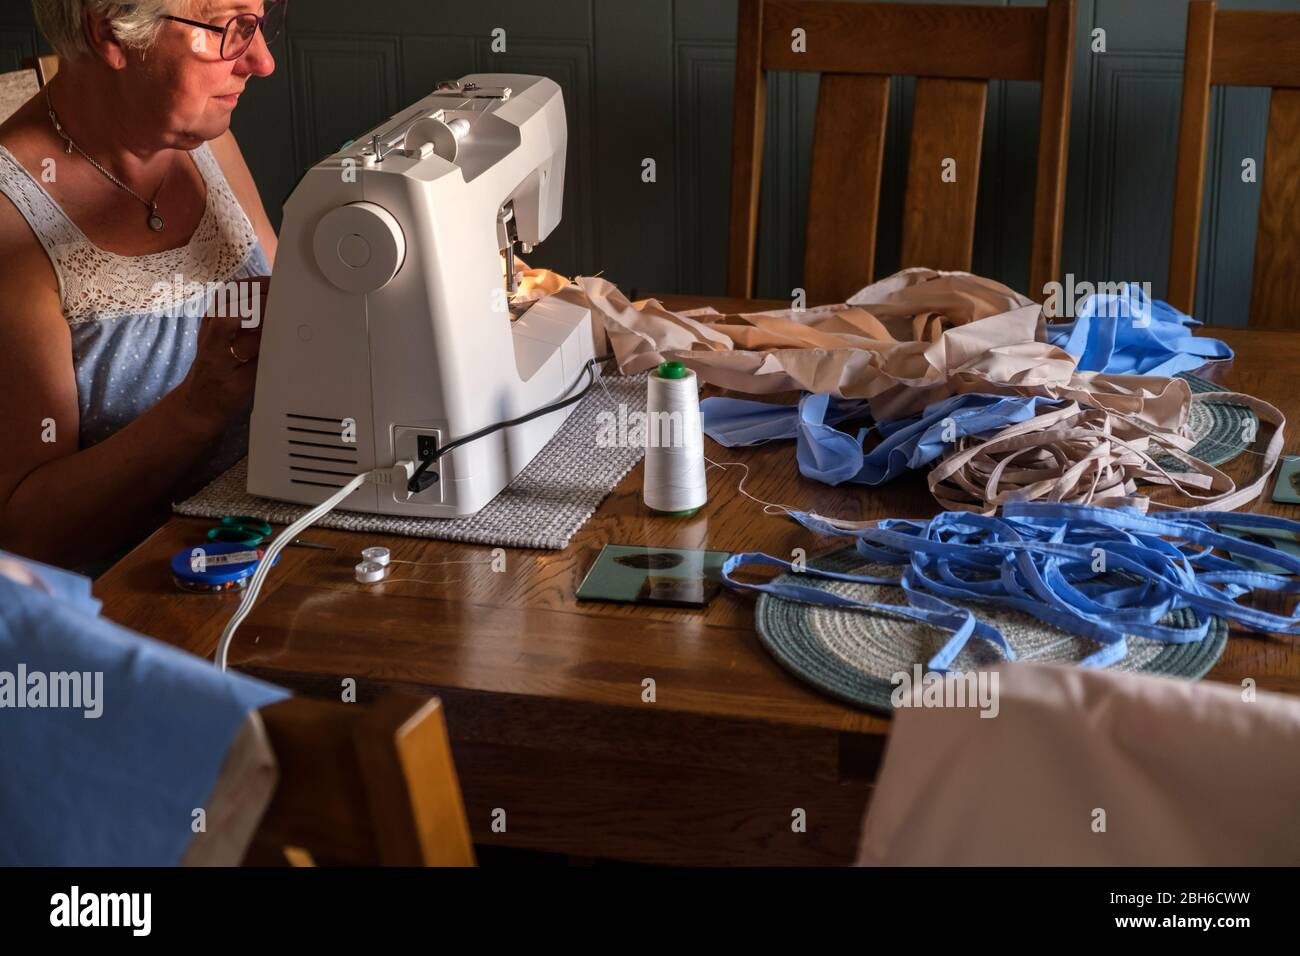 Making scrub bags for NHS Health workers during pandemic at home Stock Photo